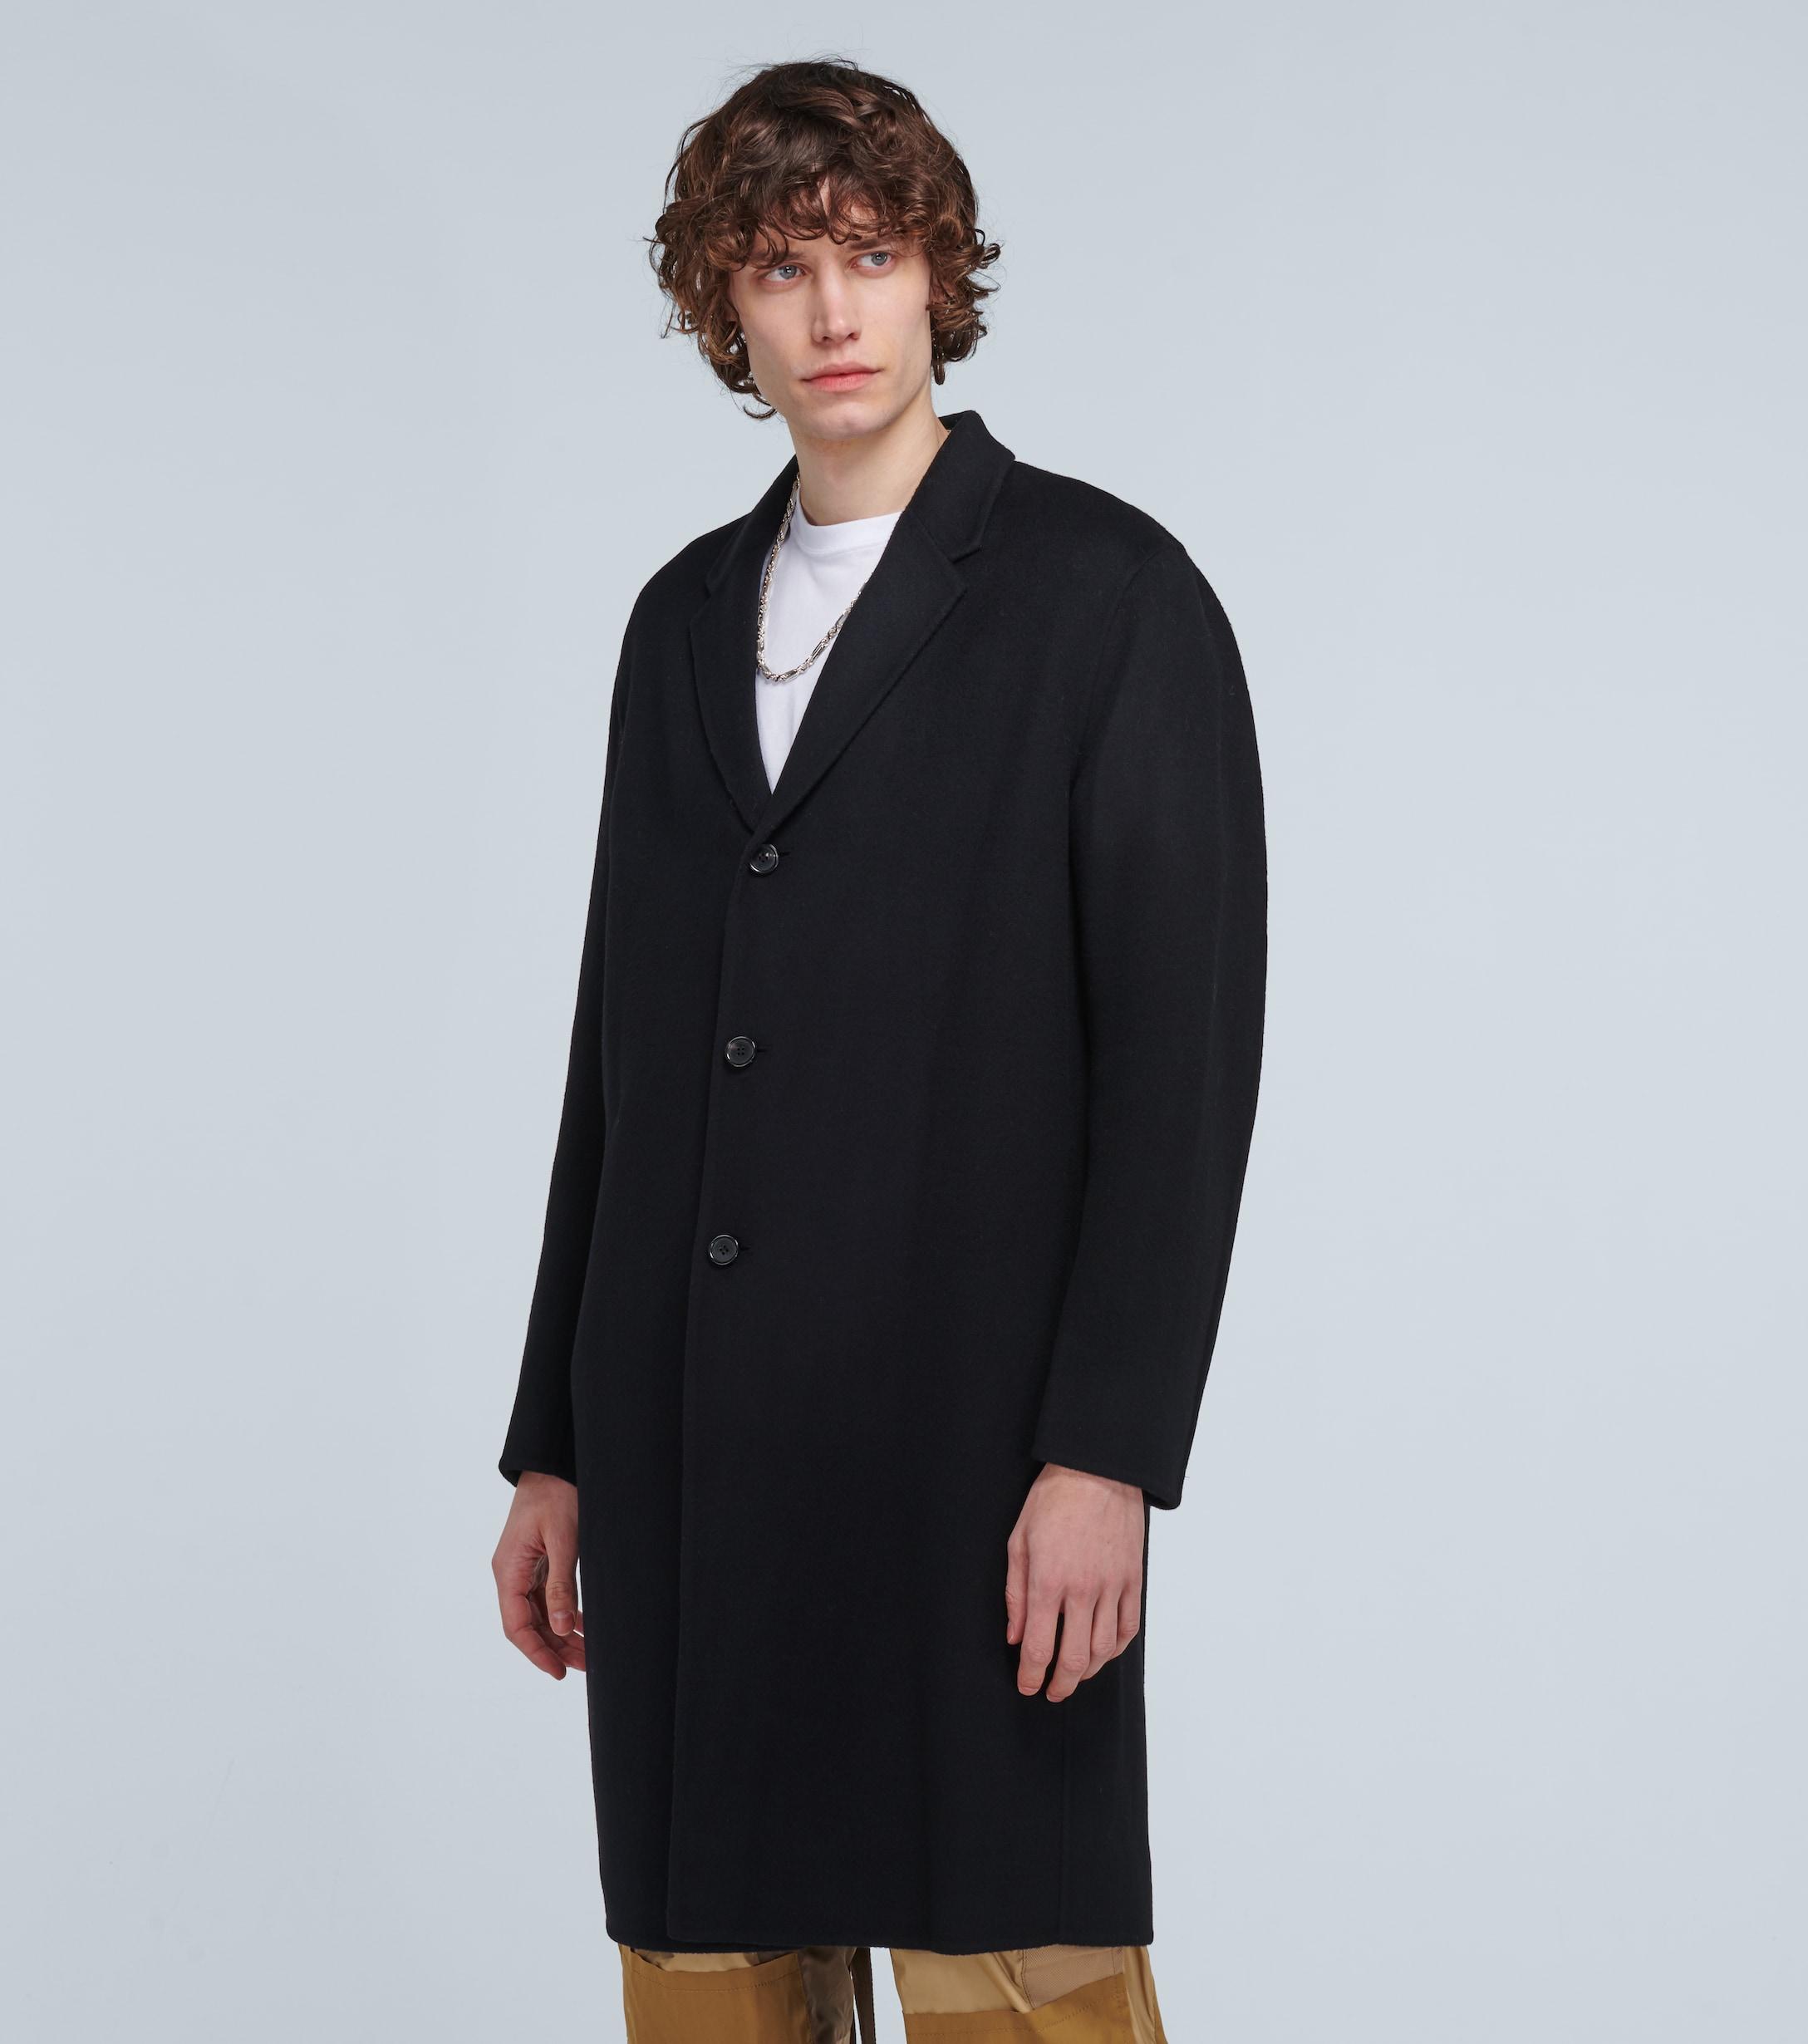 Acne Studios Chad Single-breasted Wool Coat in Black for Men - Lyst